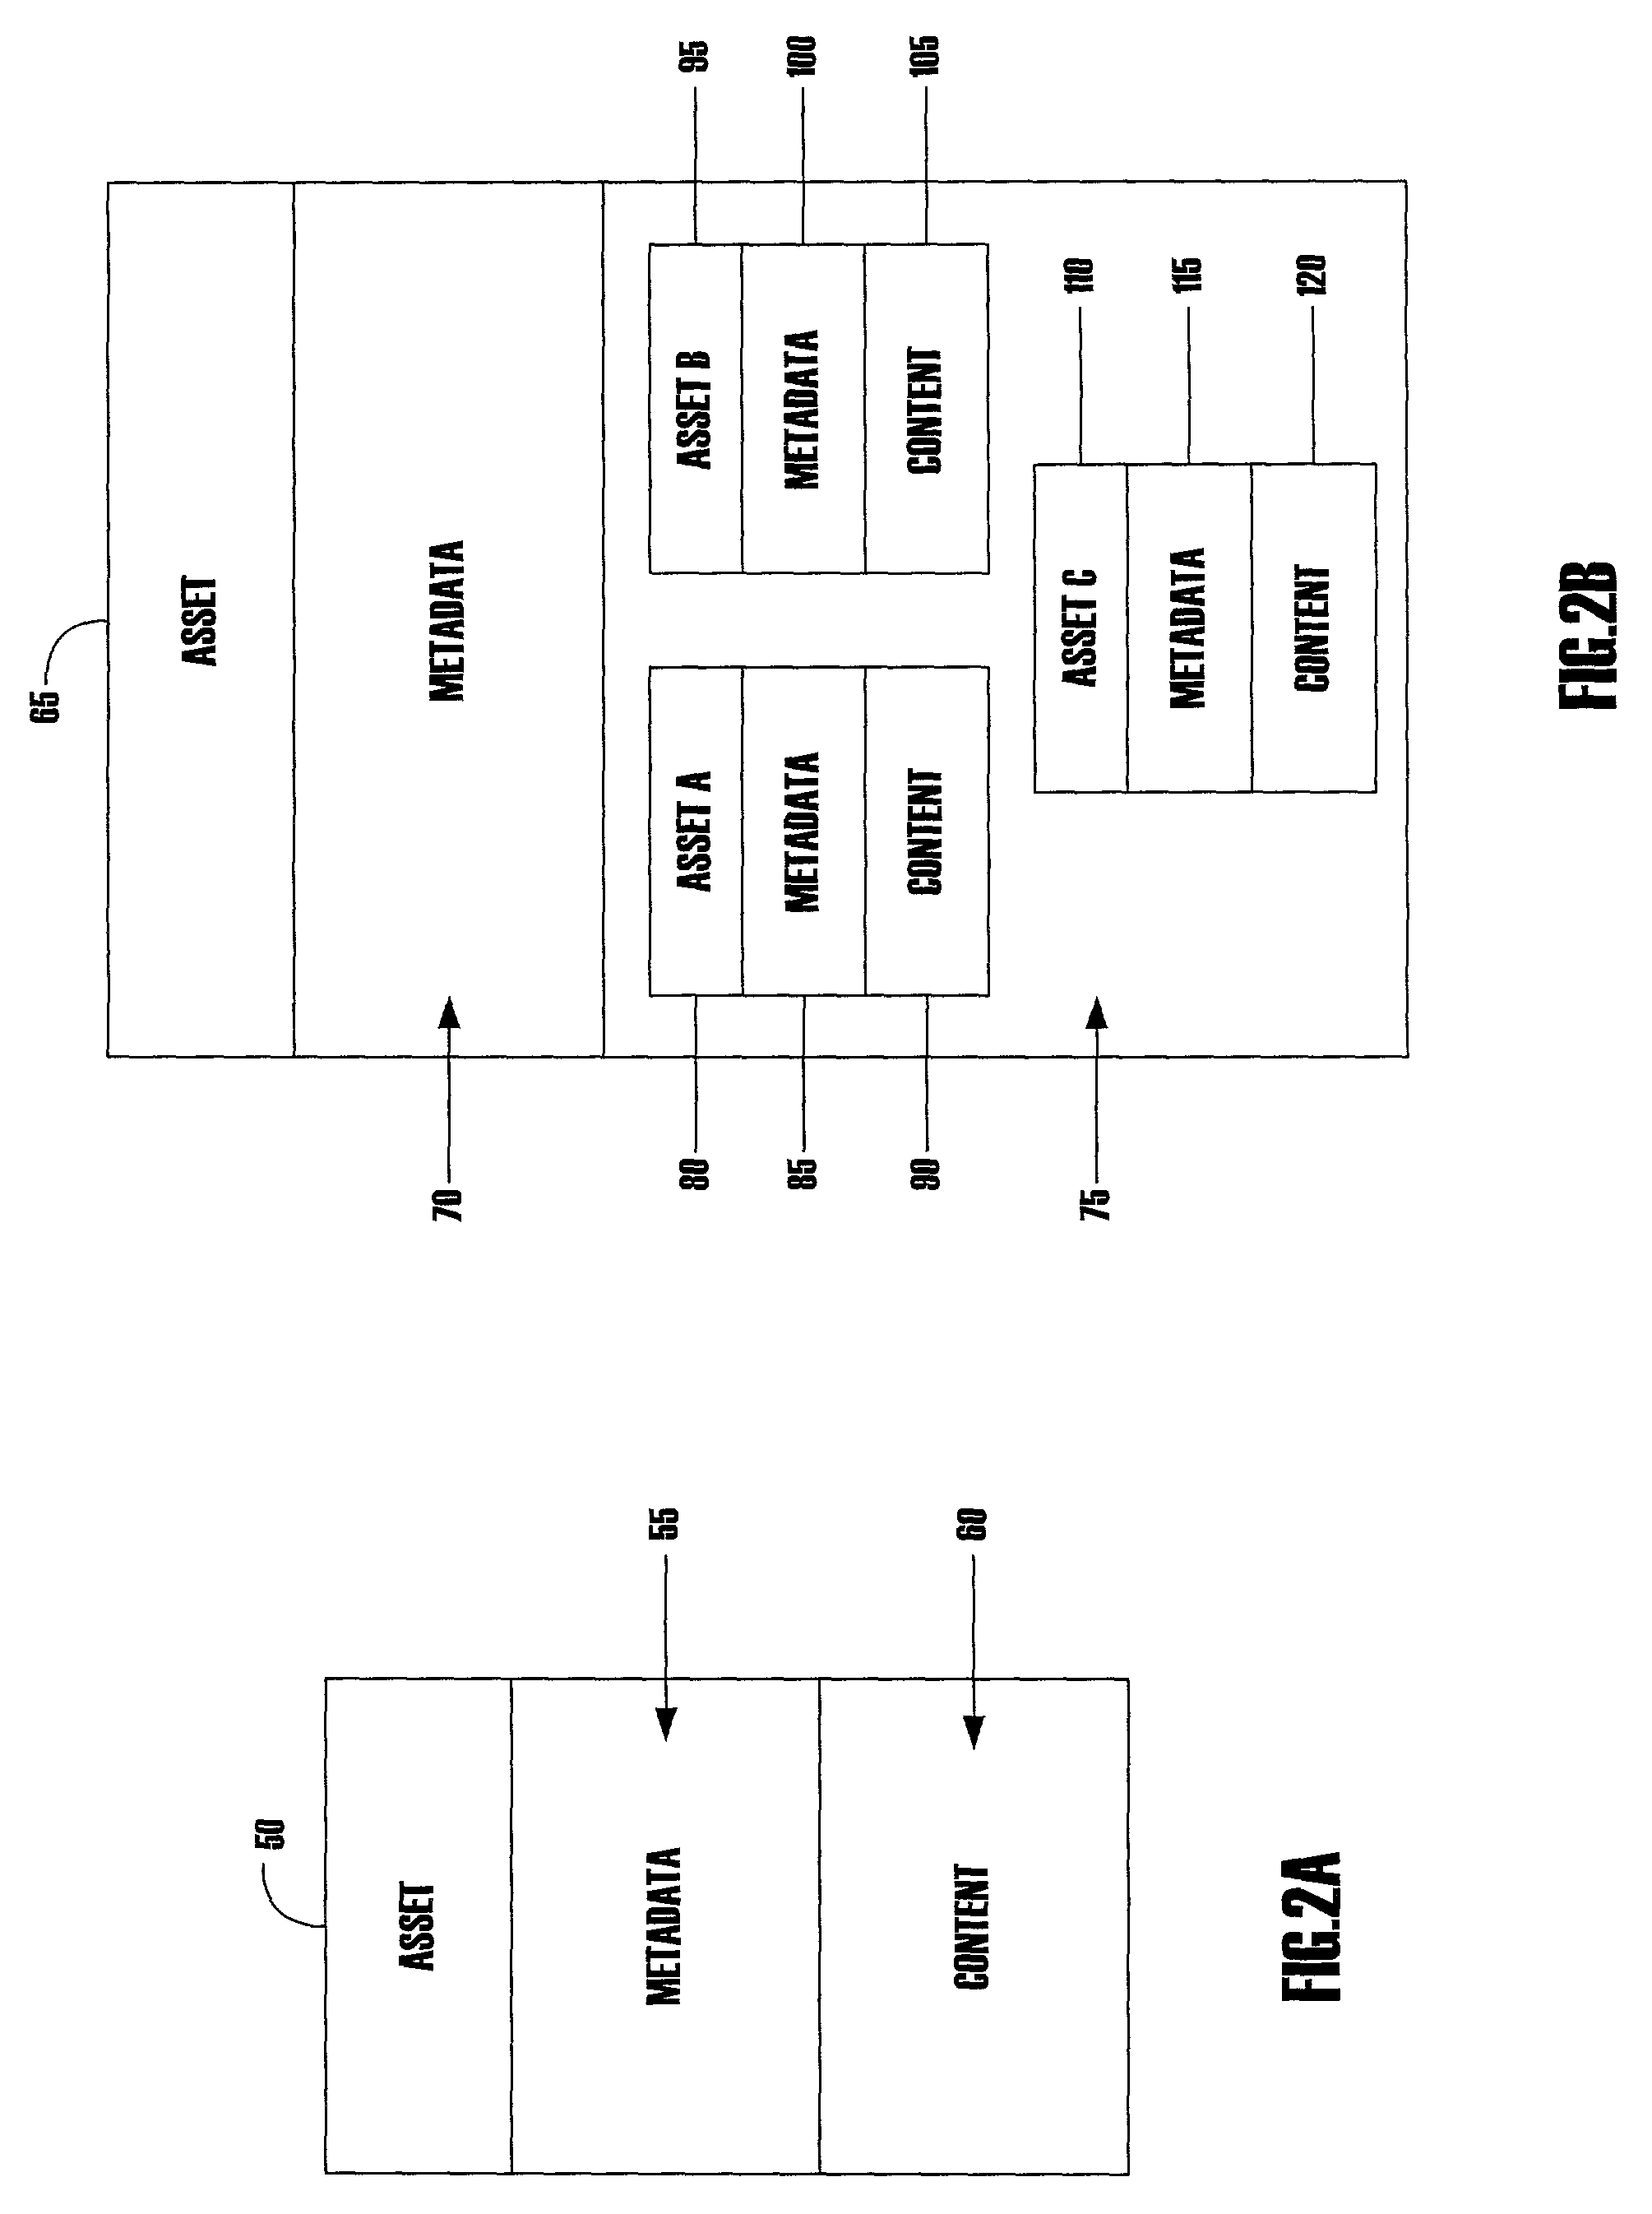 Systems and methods for packaging, distributing and managing assets in digital cable systems